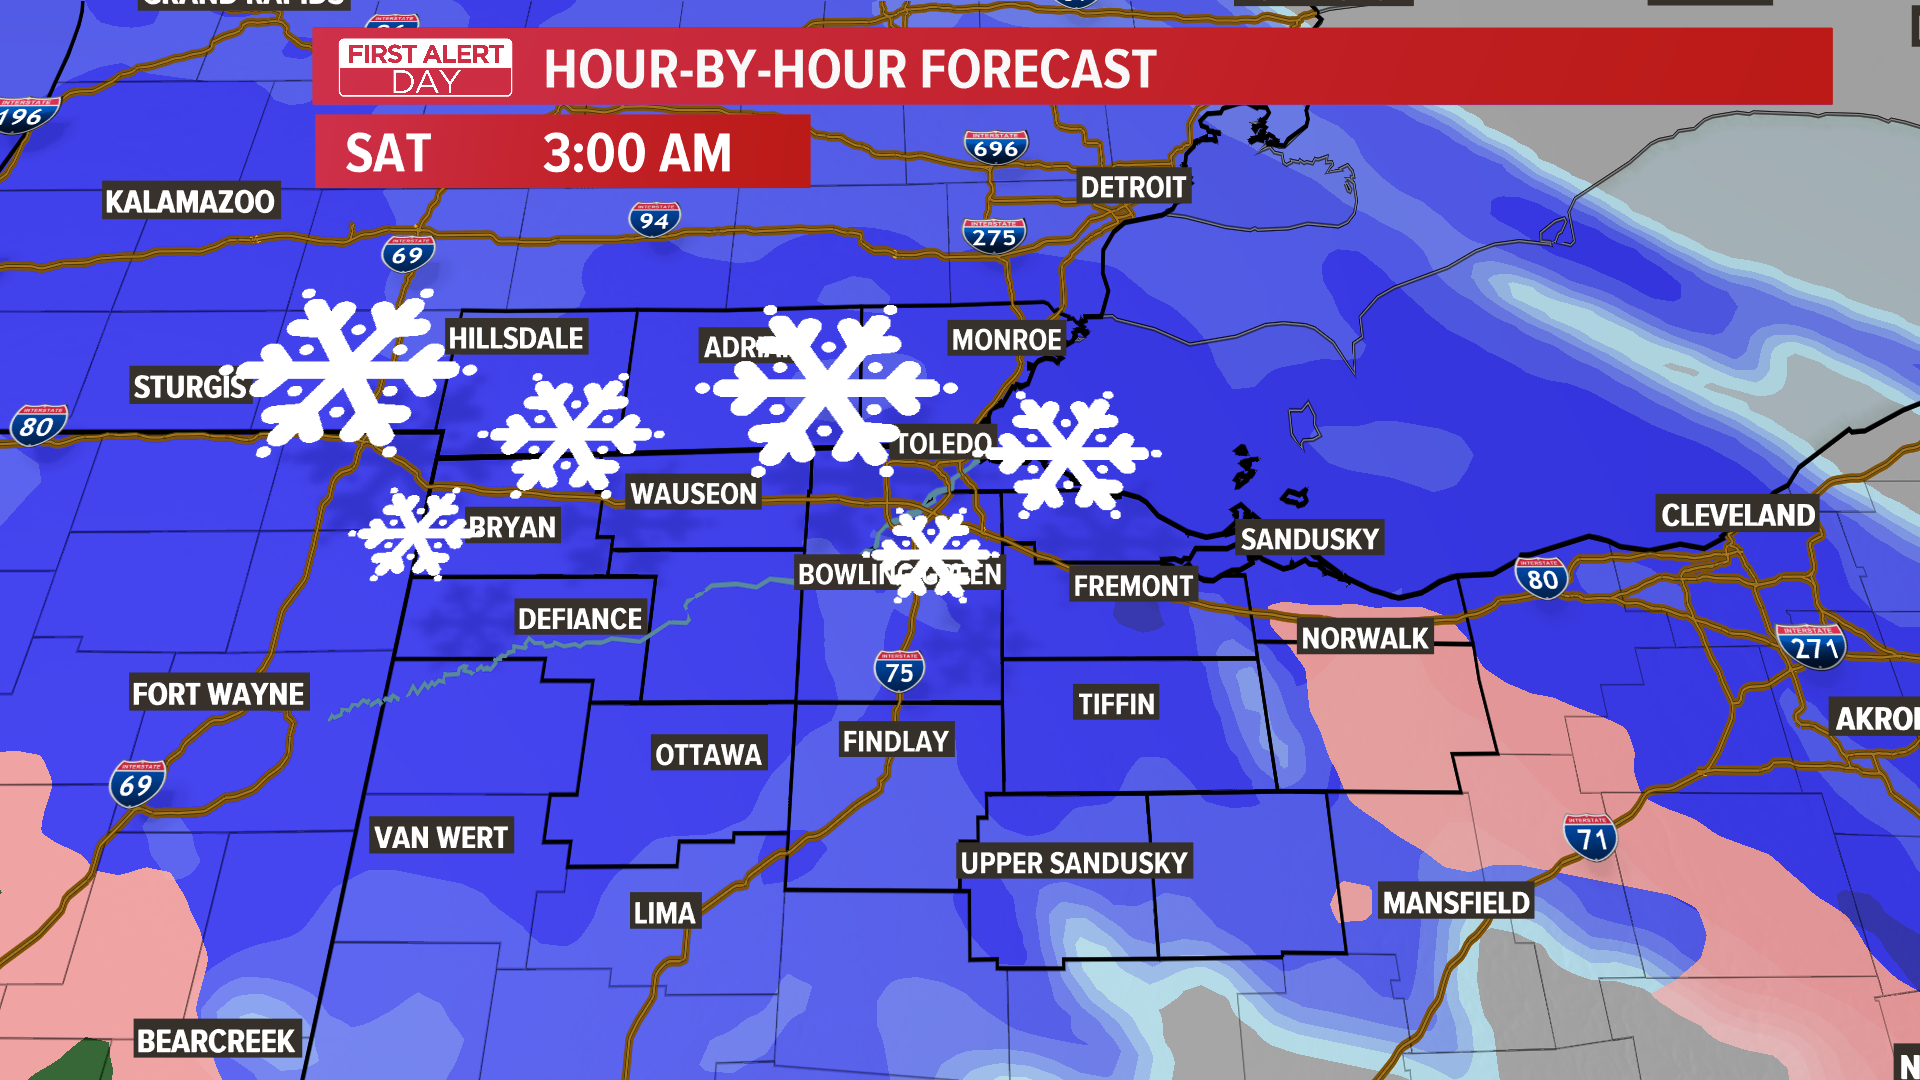 Heavy snow will move in overnight, mixing with icing conditions by daybreak.